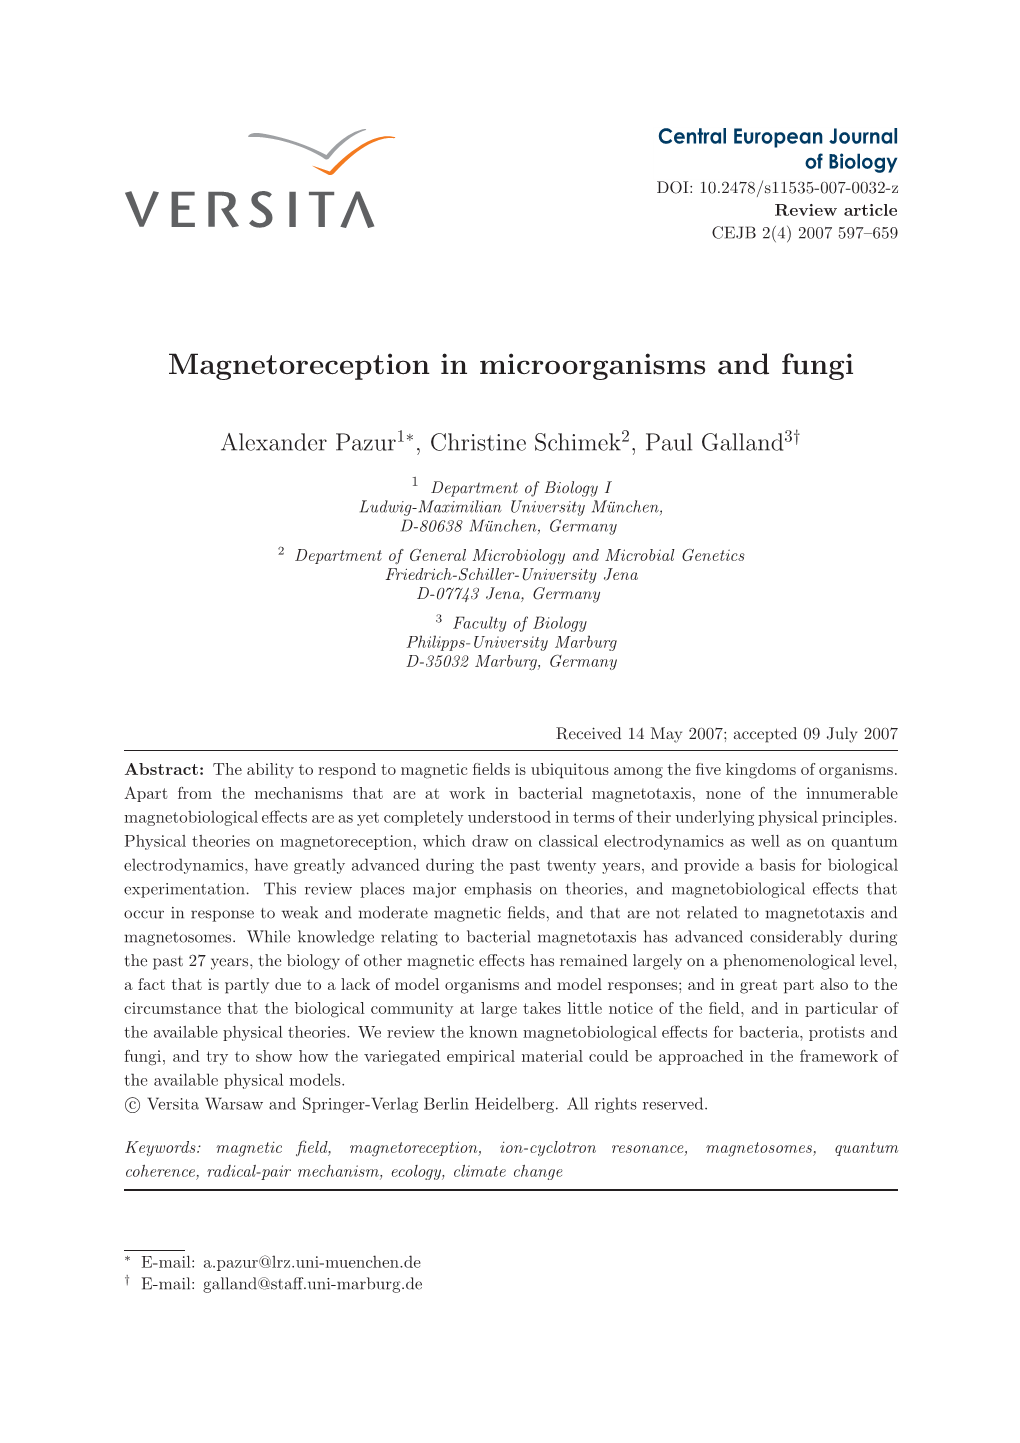 Magnetoreception in Microorganisms and Fungi